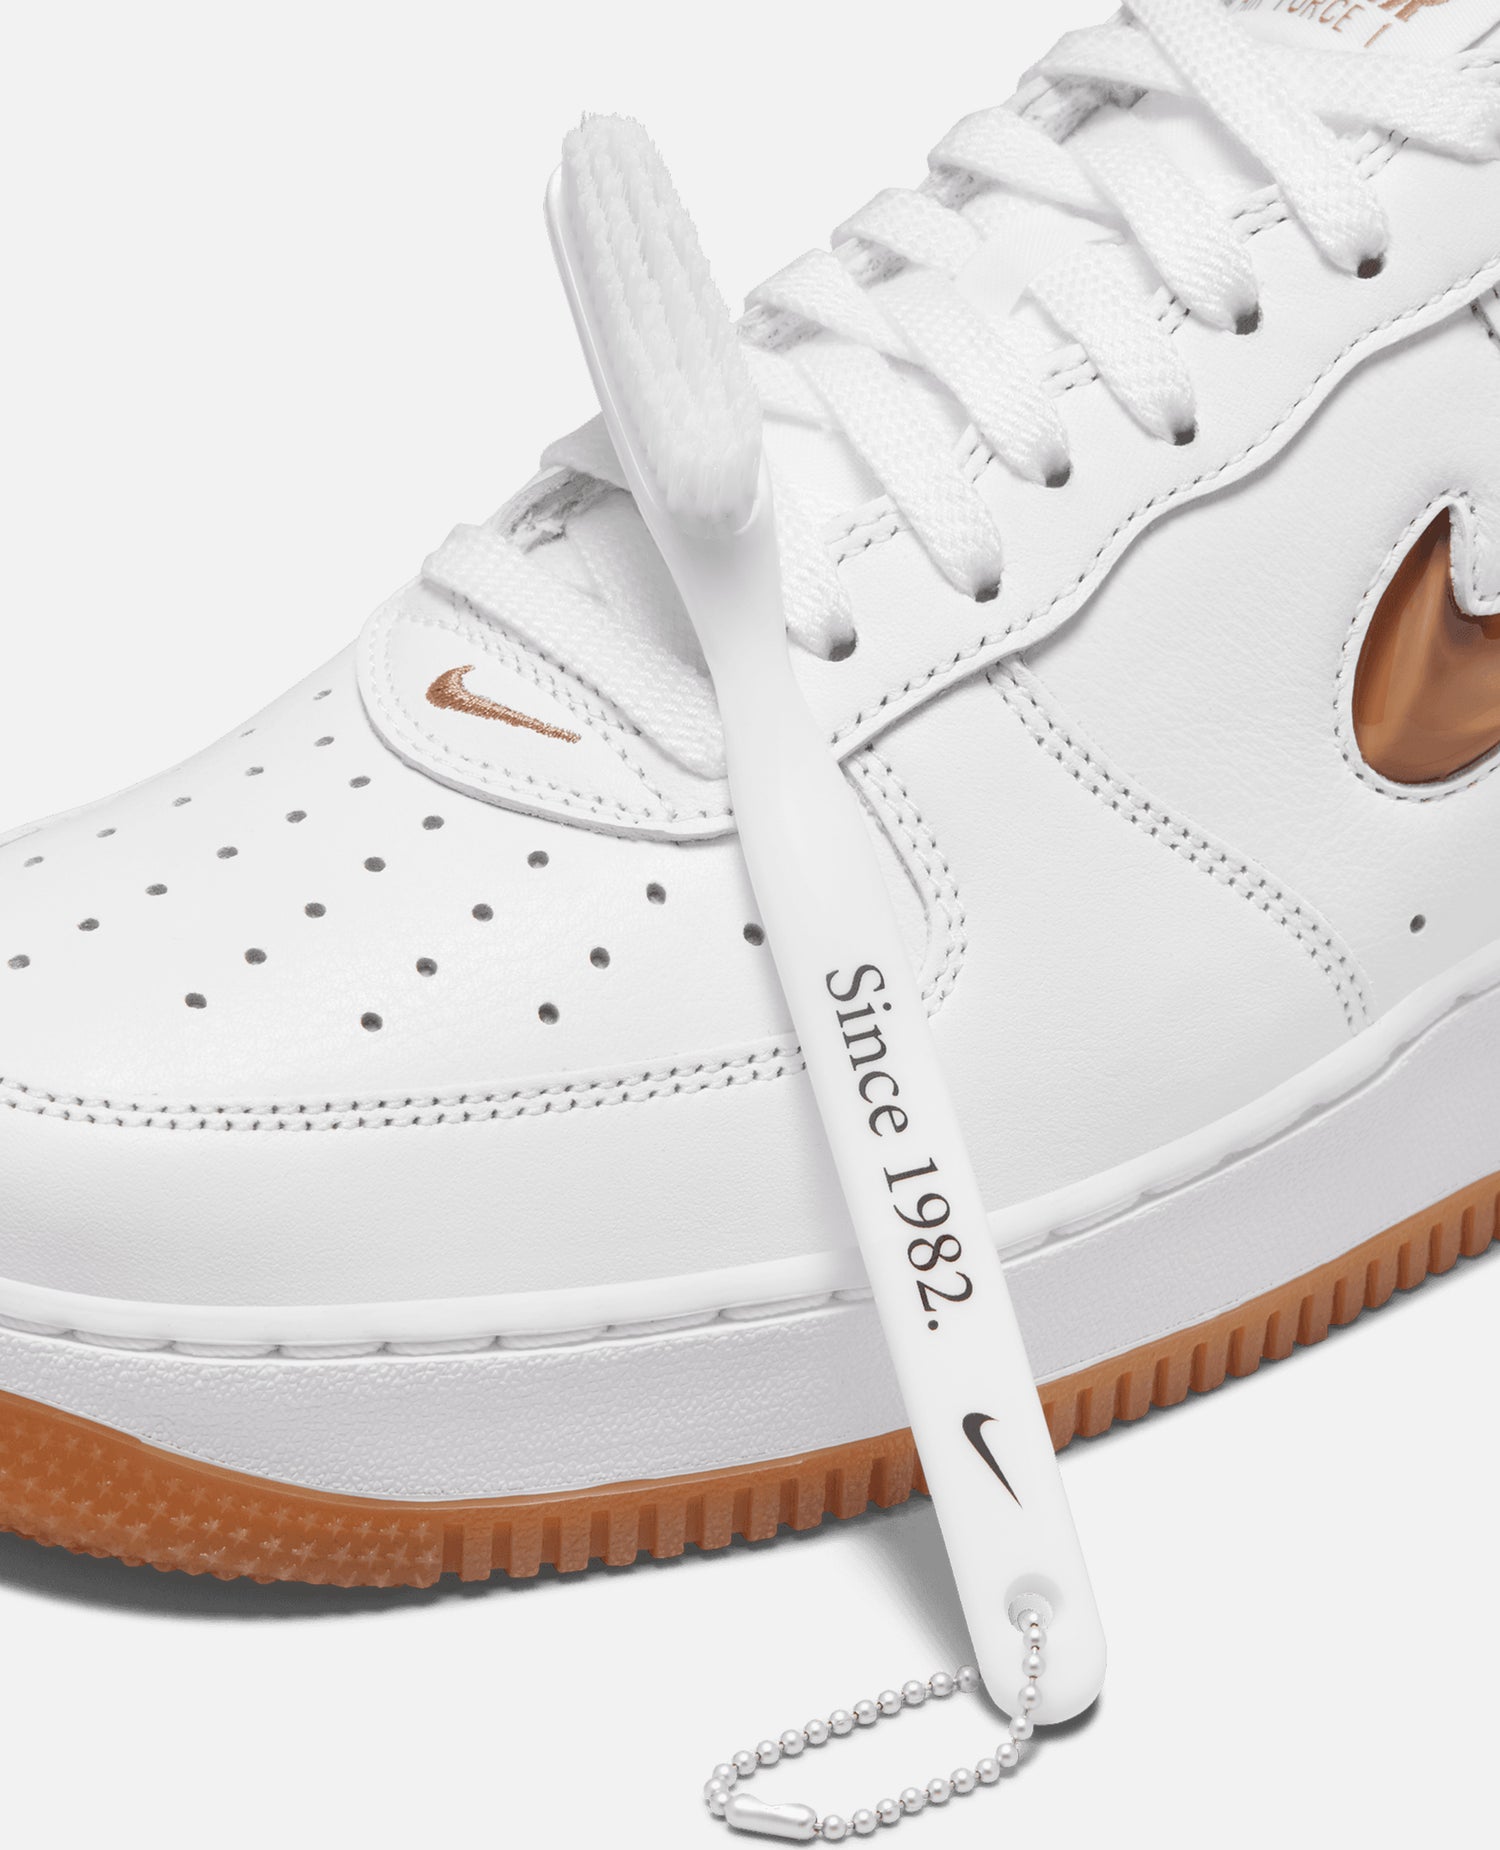 Nike Air Force 1 Low Retro (White/Gum Med Brown)